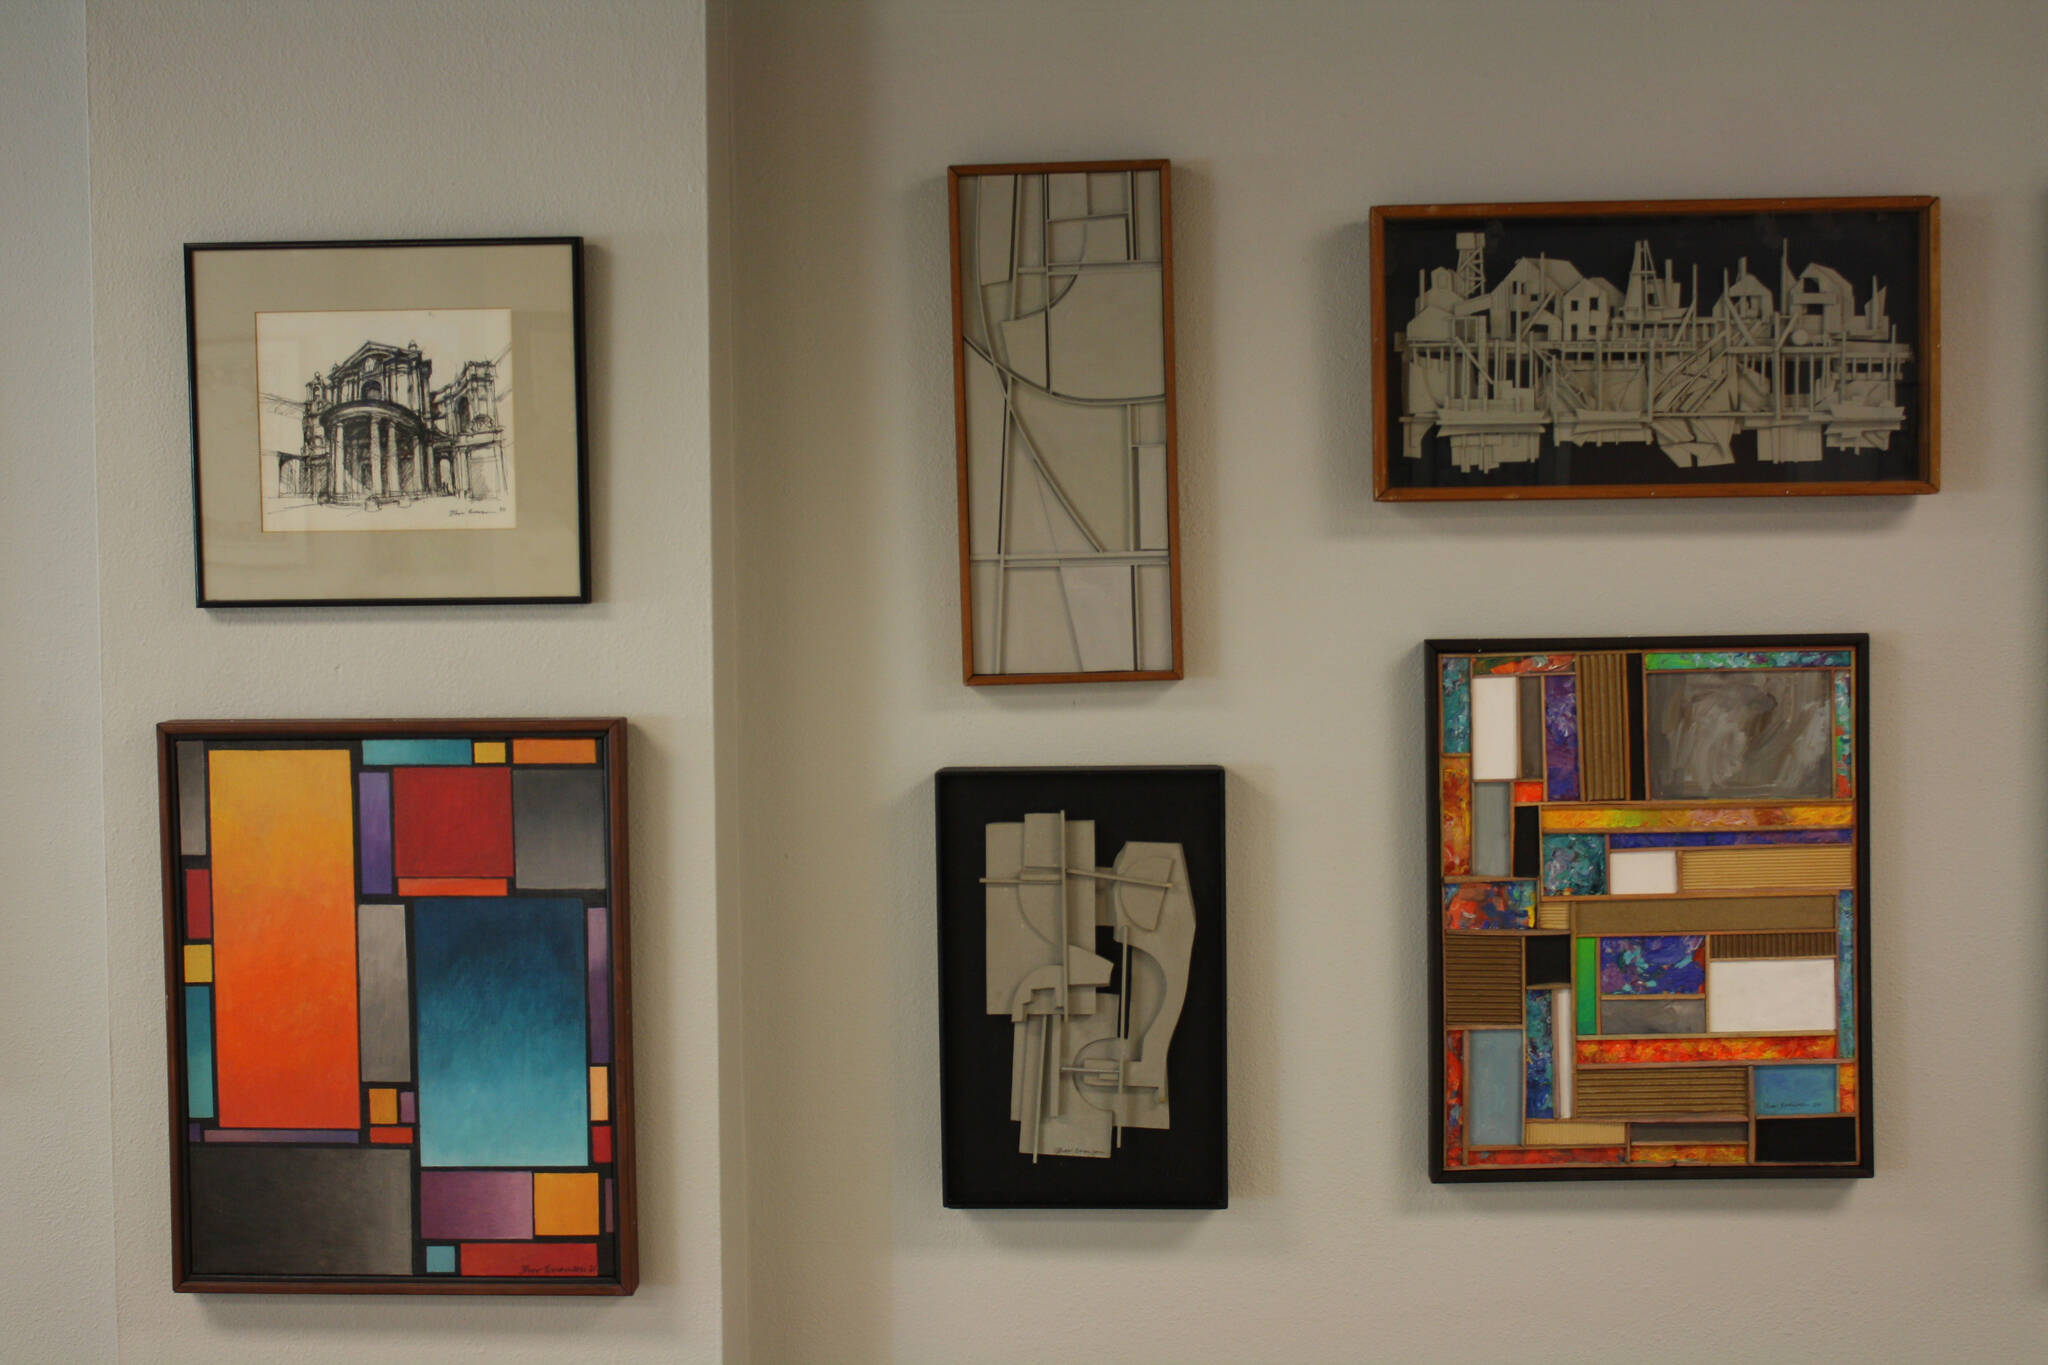 Pieces hang on the walls at the Kenai Art Center on Tuesday, May 31, 2022. (Camille Botello/Peninsula Clarion)